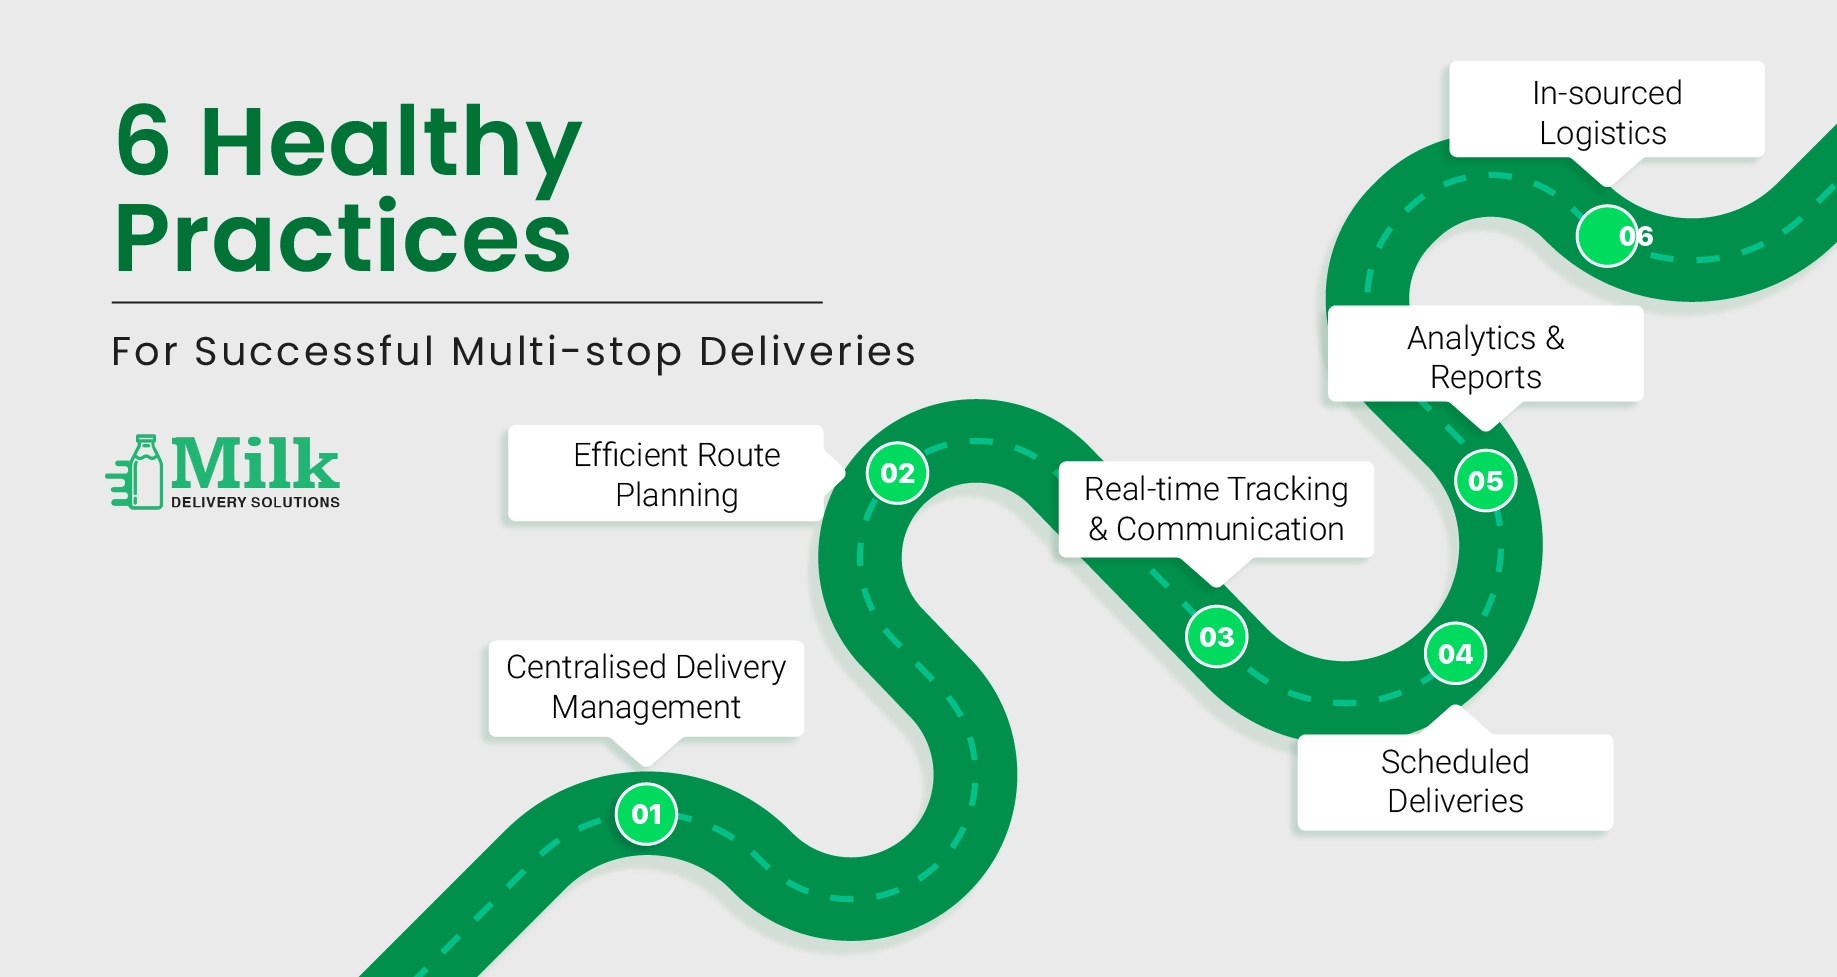 ravi garg, mds, practices, multi-location, deliveries, delivery mananagement, centralised delivery management, route planning, real-time tracking, communication, scheduled deliveries, analytics, reports, in-sourced logistics